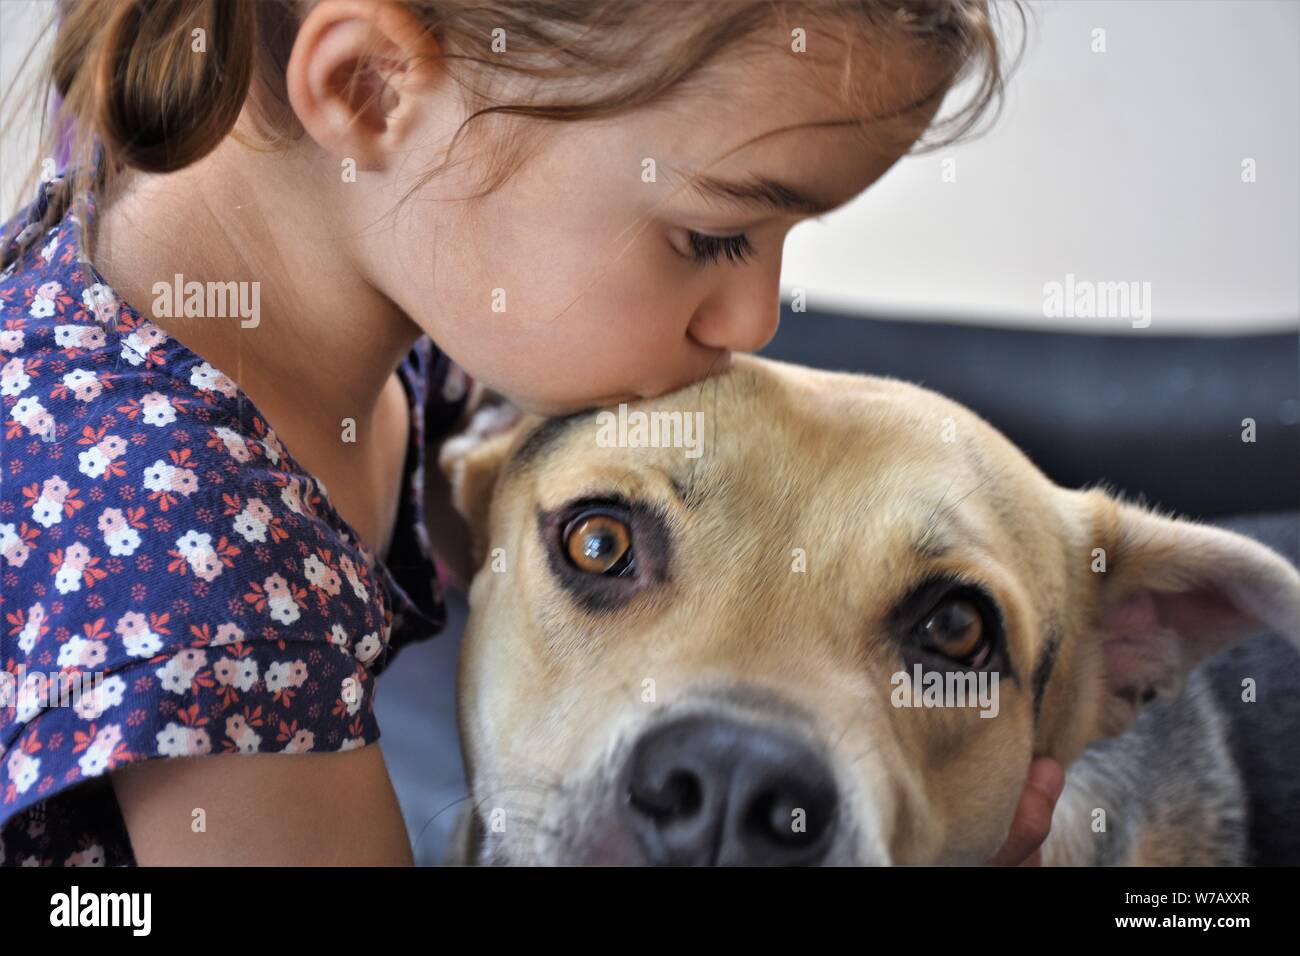 5 year old girl kissing with her real family dog who she loves and takes care of by herself Stock Photo